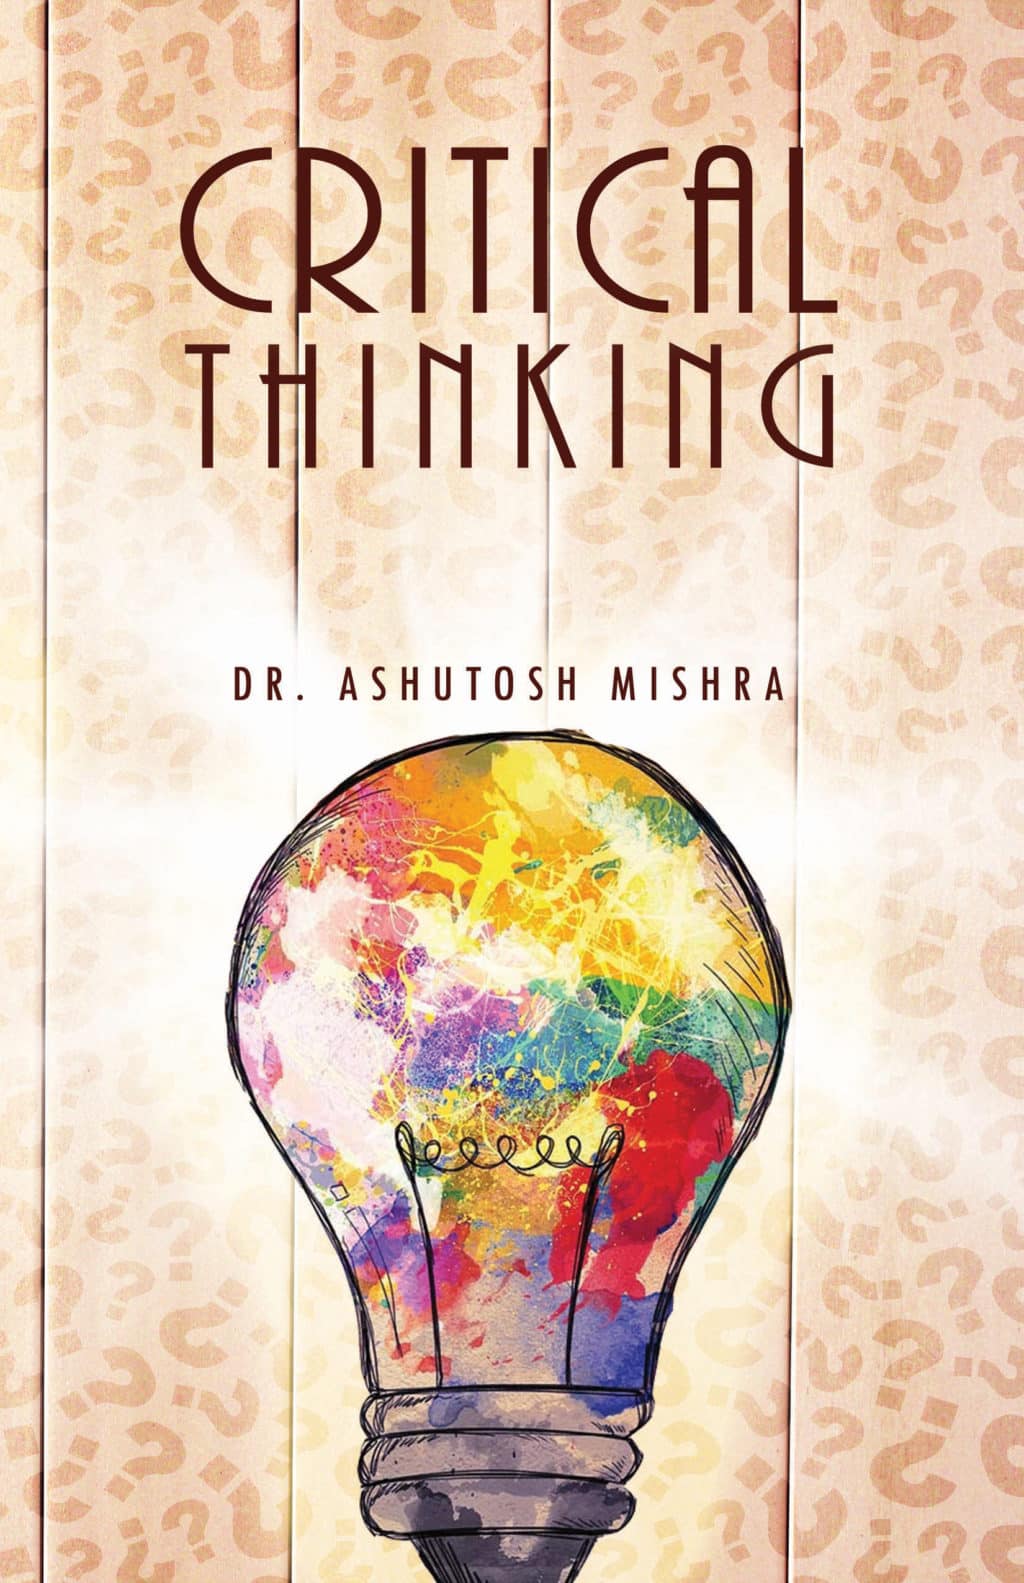 book on critical thinking